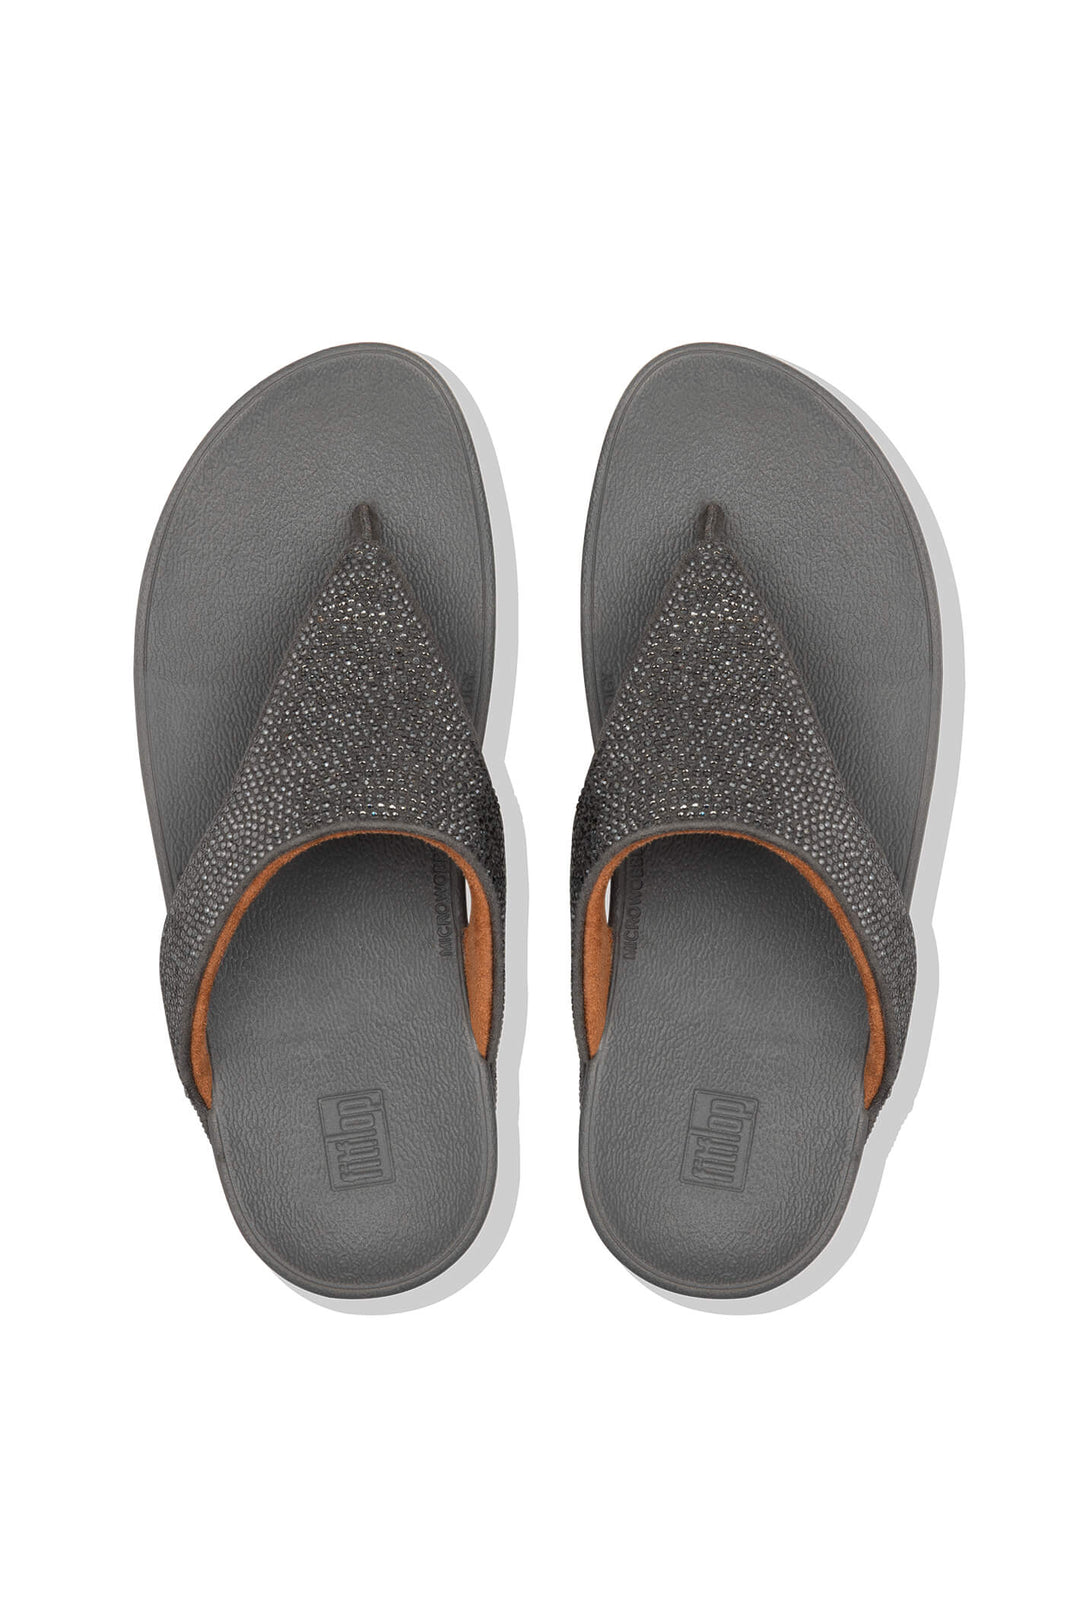 Fitflop Lottie T81 shimmer Crystal Toe-Thong Sandal Pewter 054 - Shirley Allum#colour_pewter-054